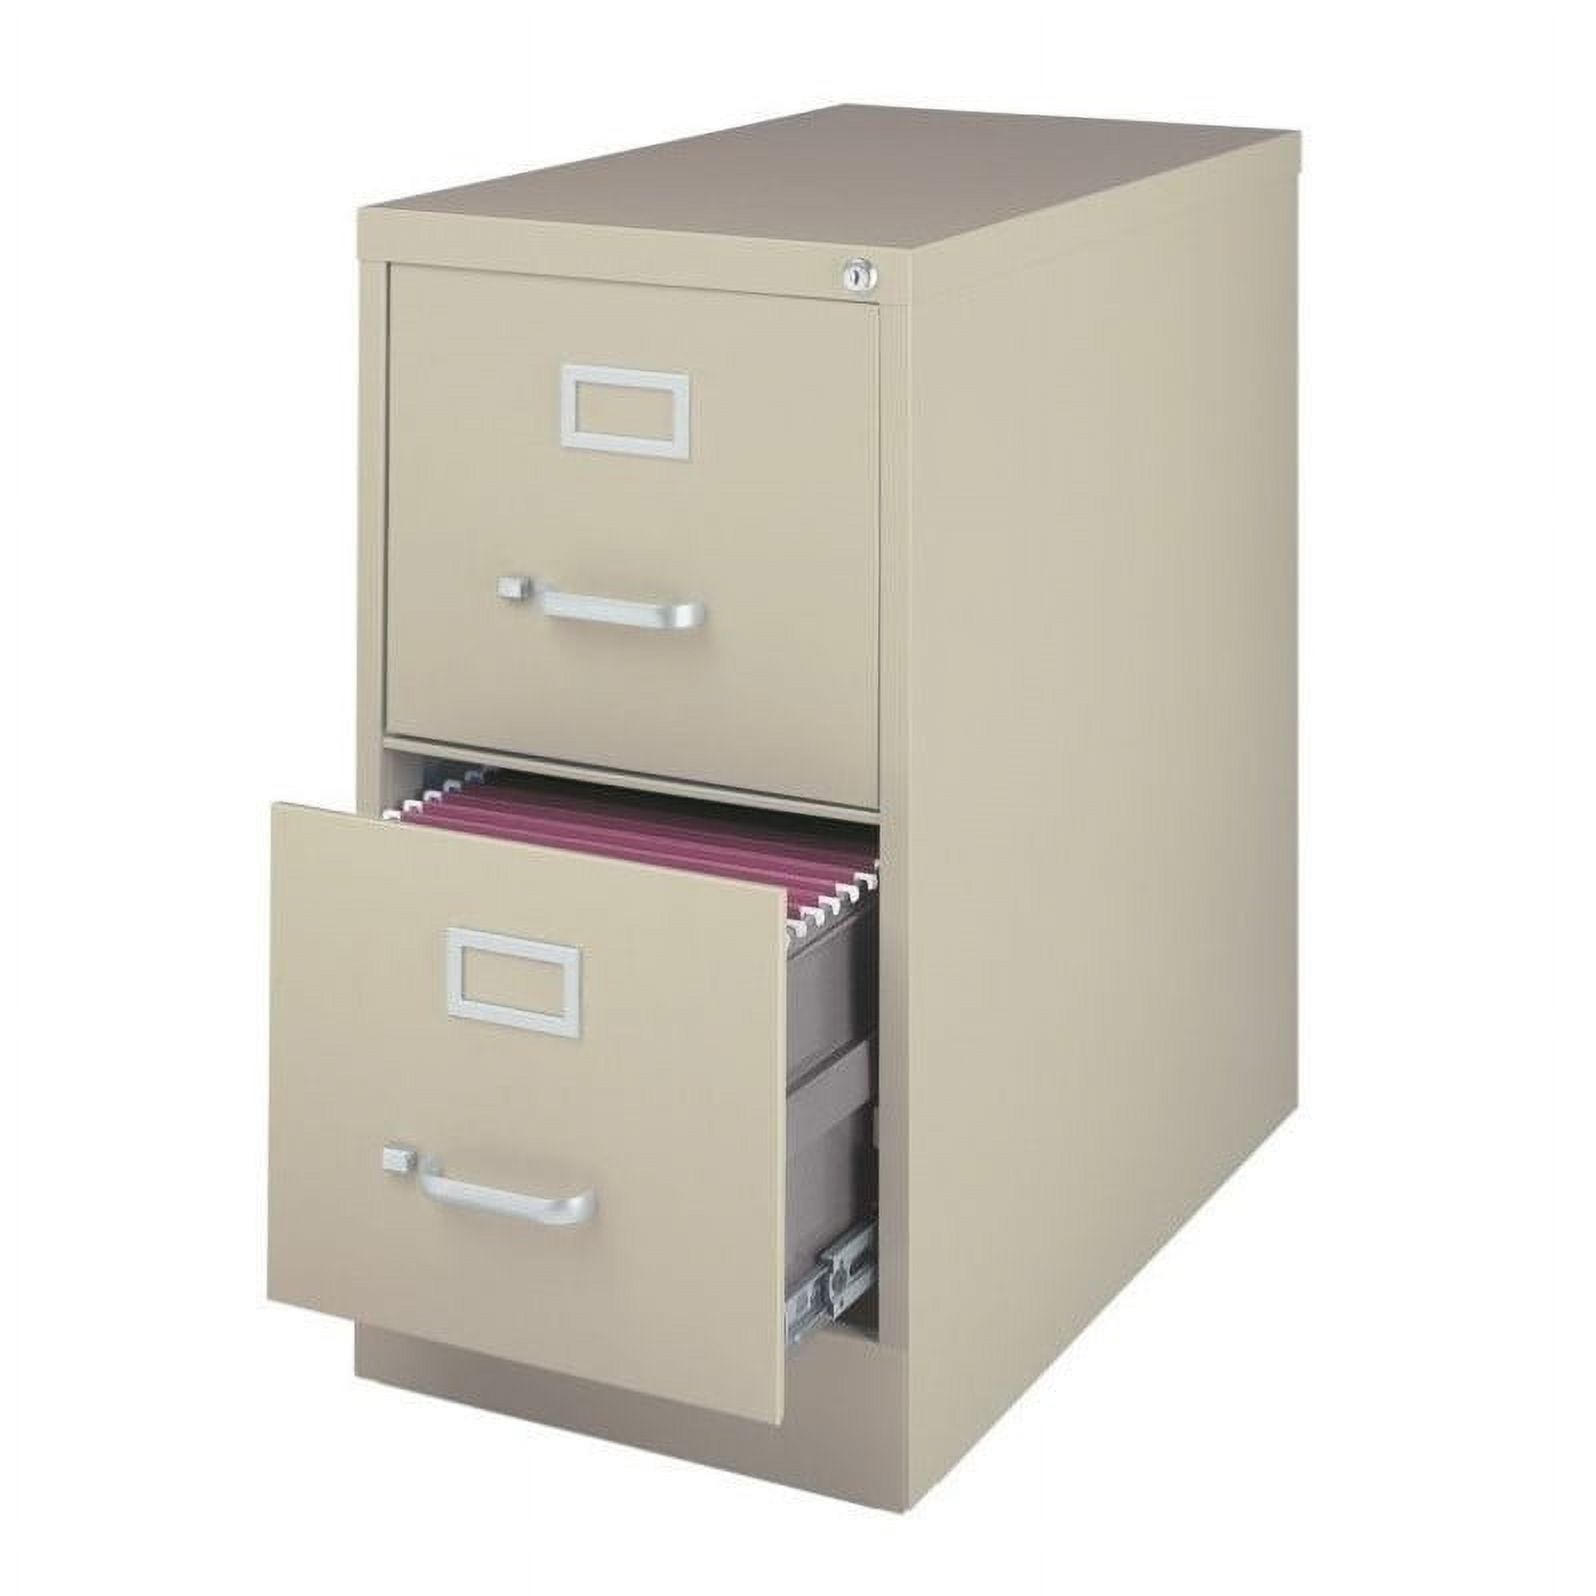 Value Pack (Set of 2) 2 Drawer Vertical Letter File Cabinet in Putty - image 3 of 3